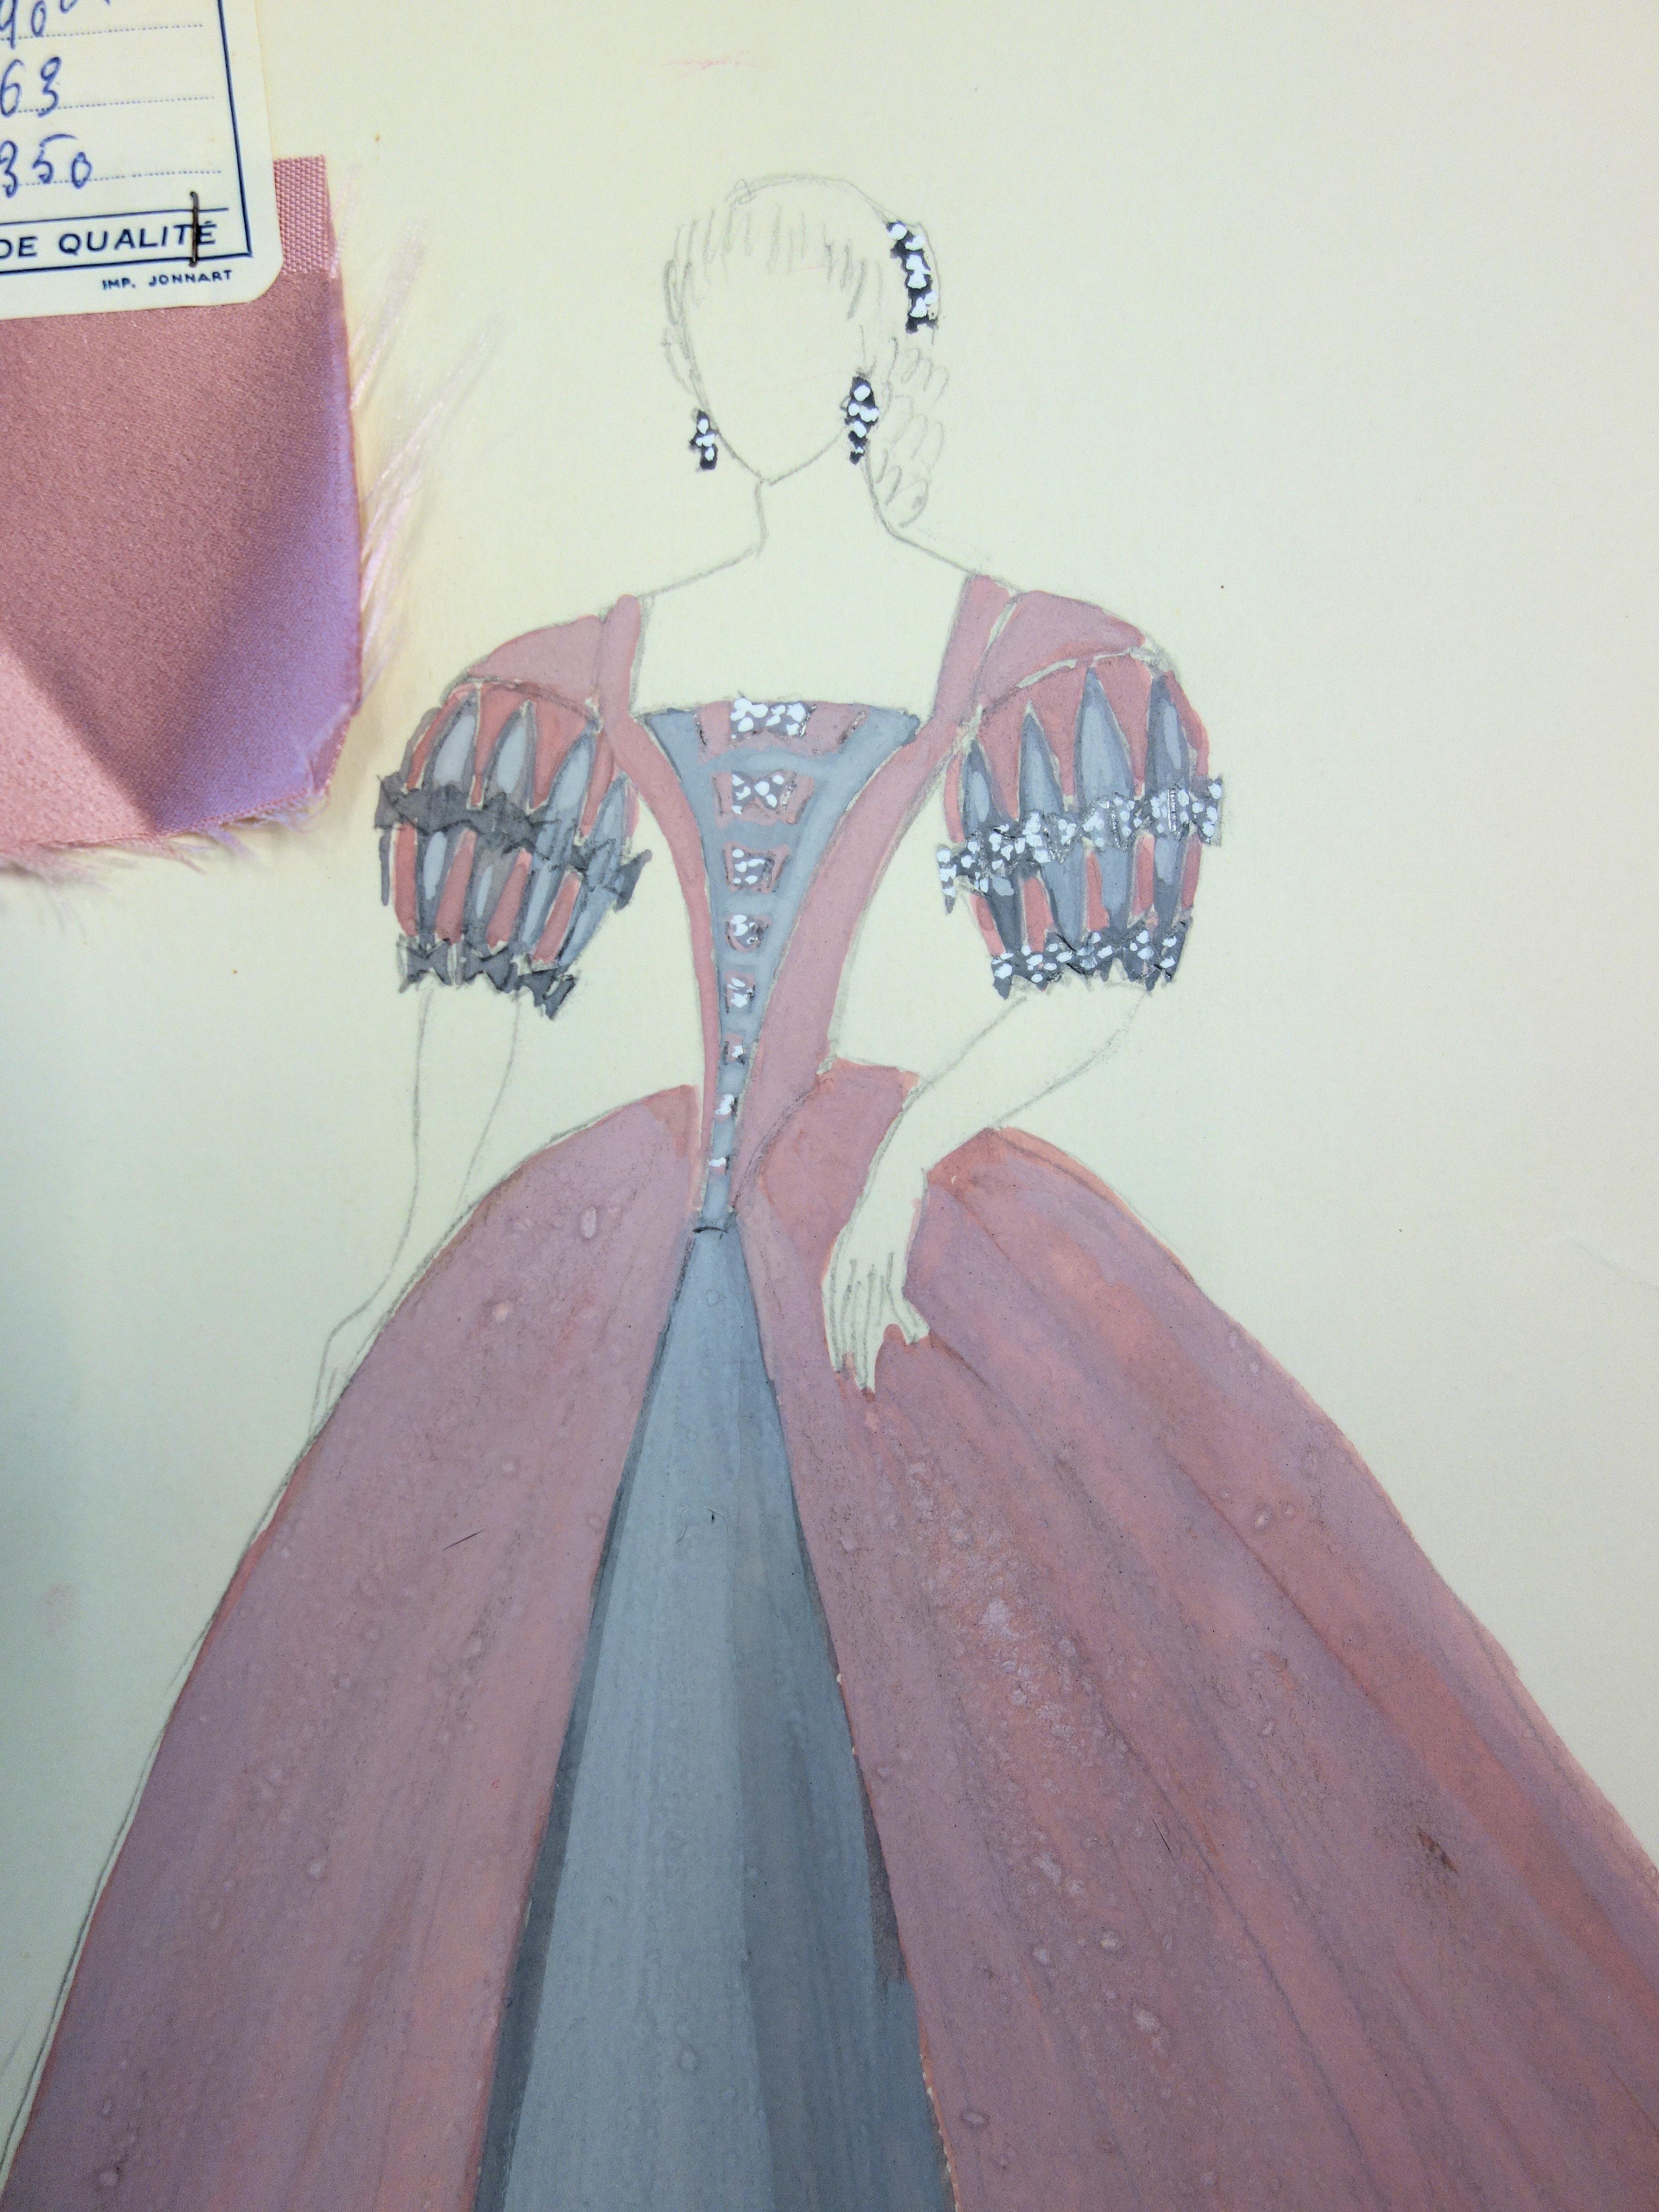 Ballroom costume - Original pencil and watercolor drawing  - Art by Suzanne Lalique